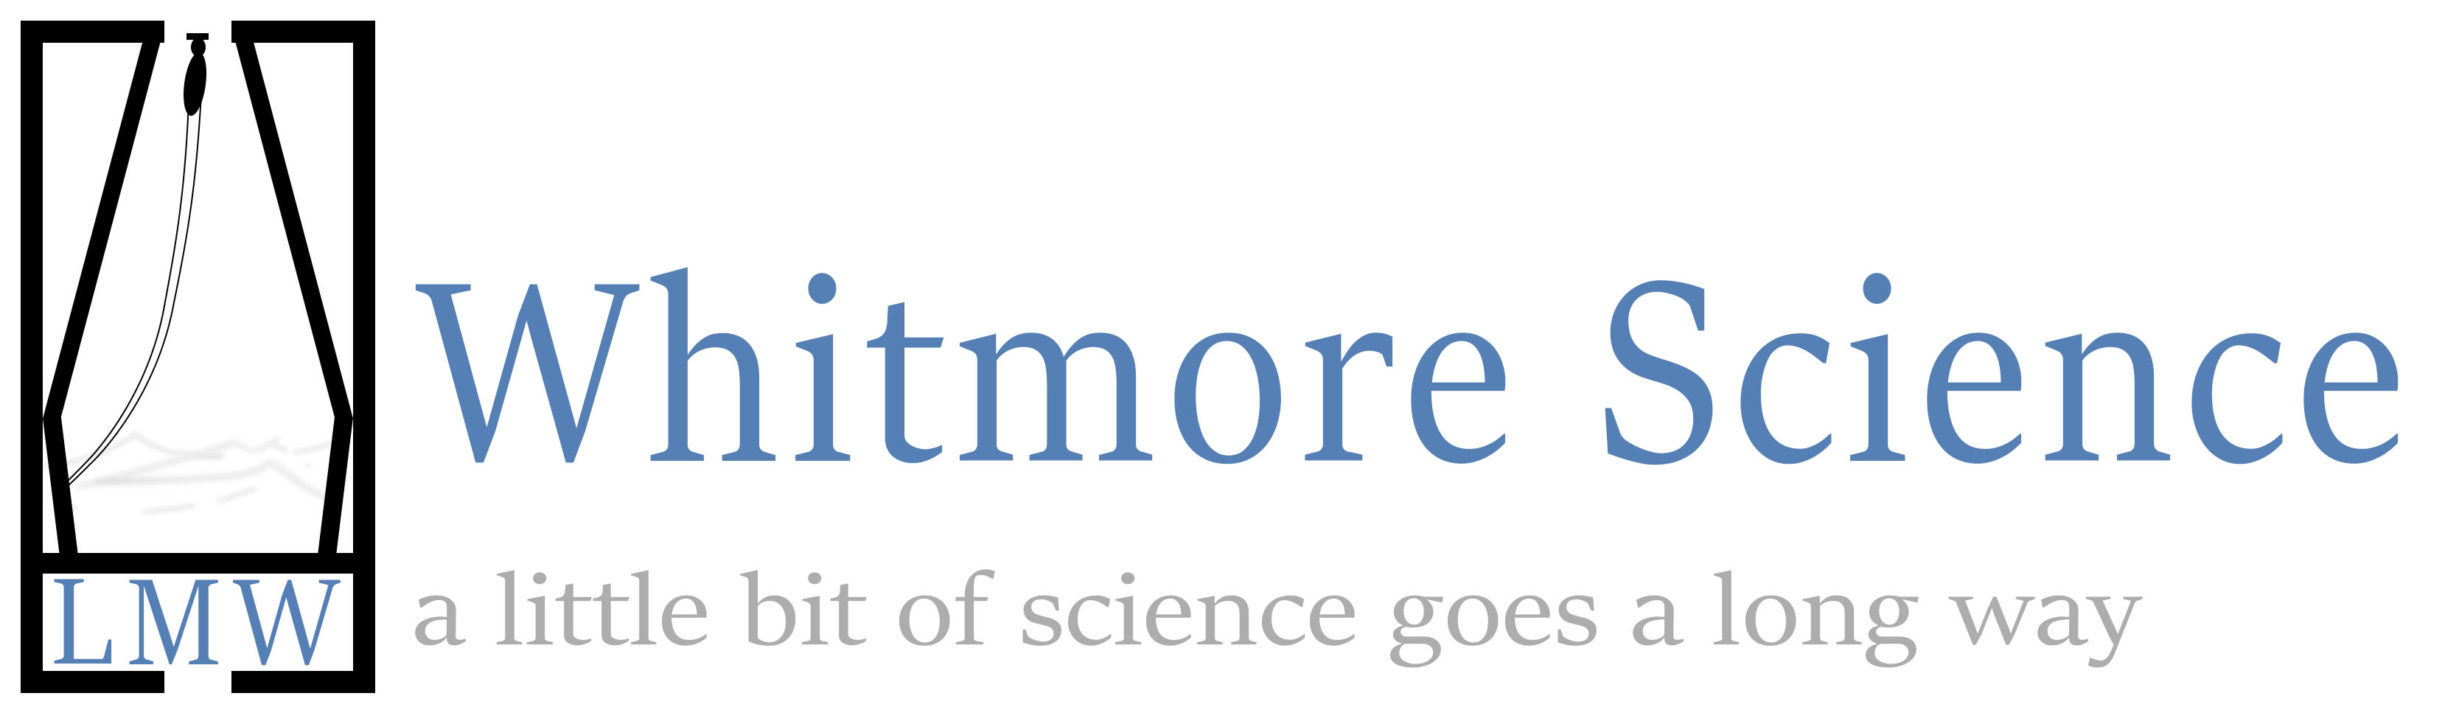 Whitmore Science